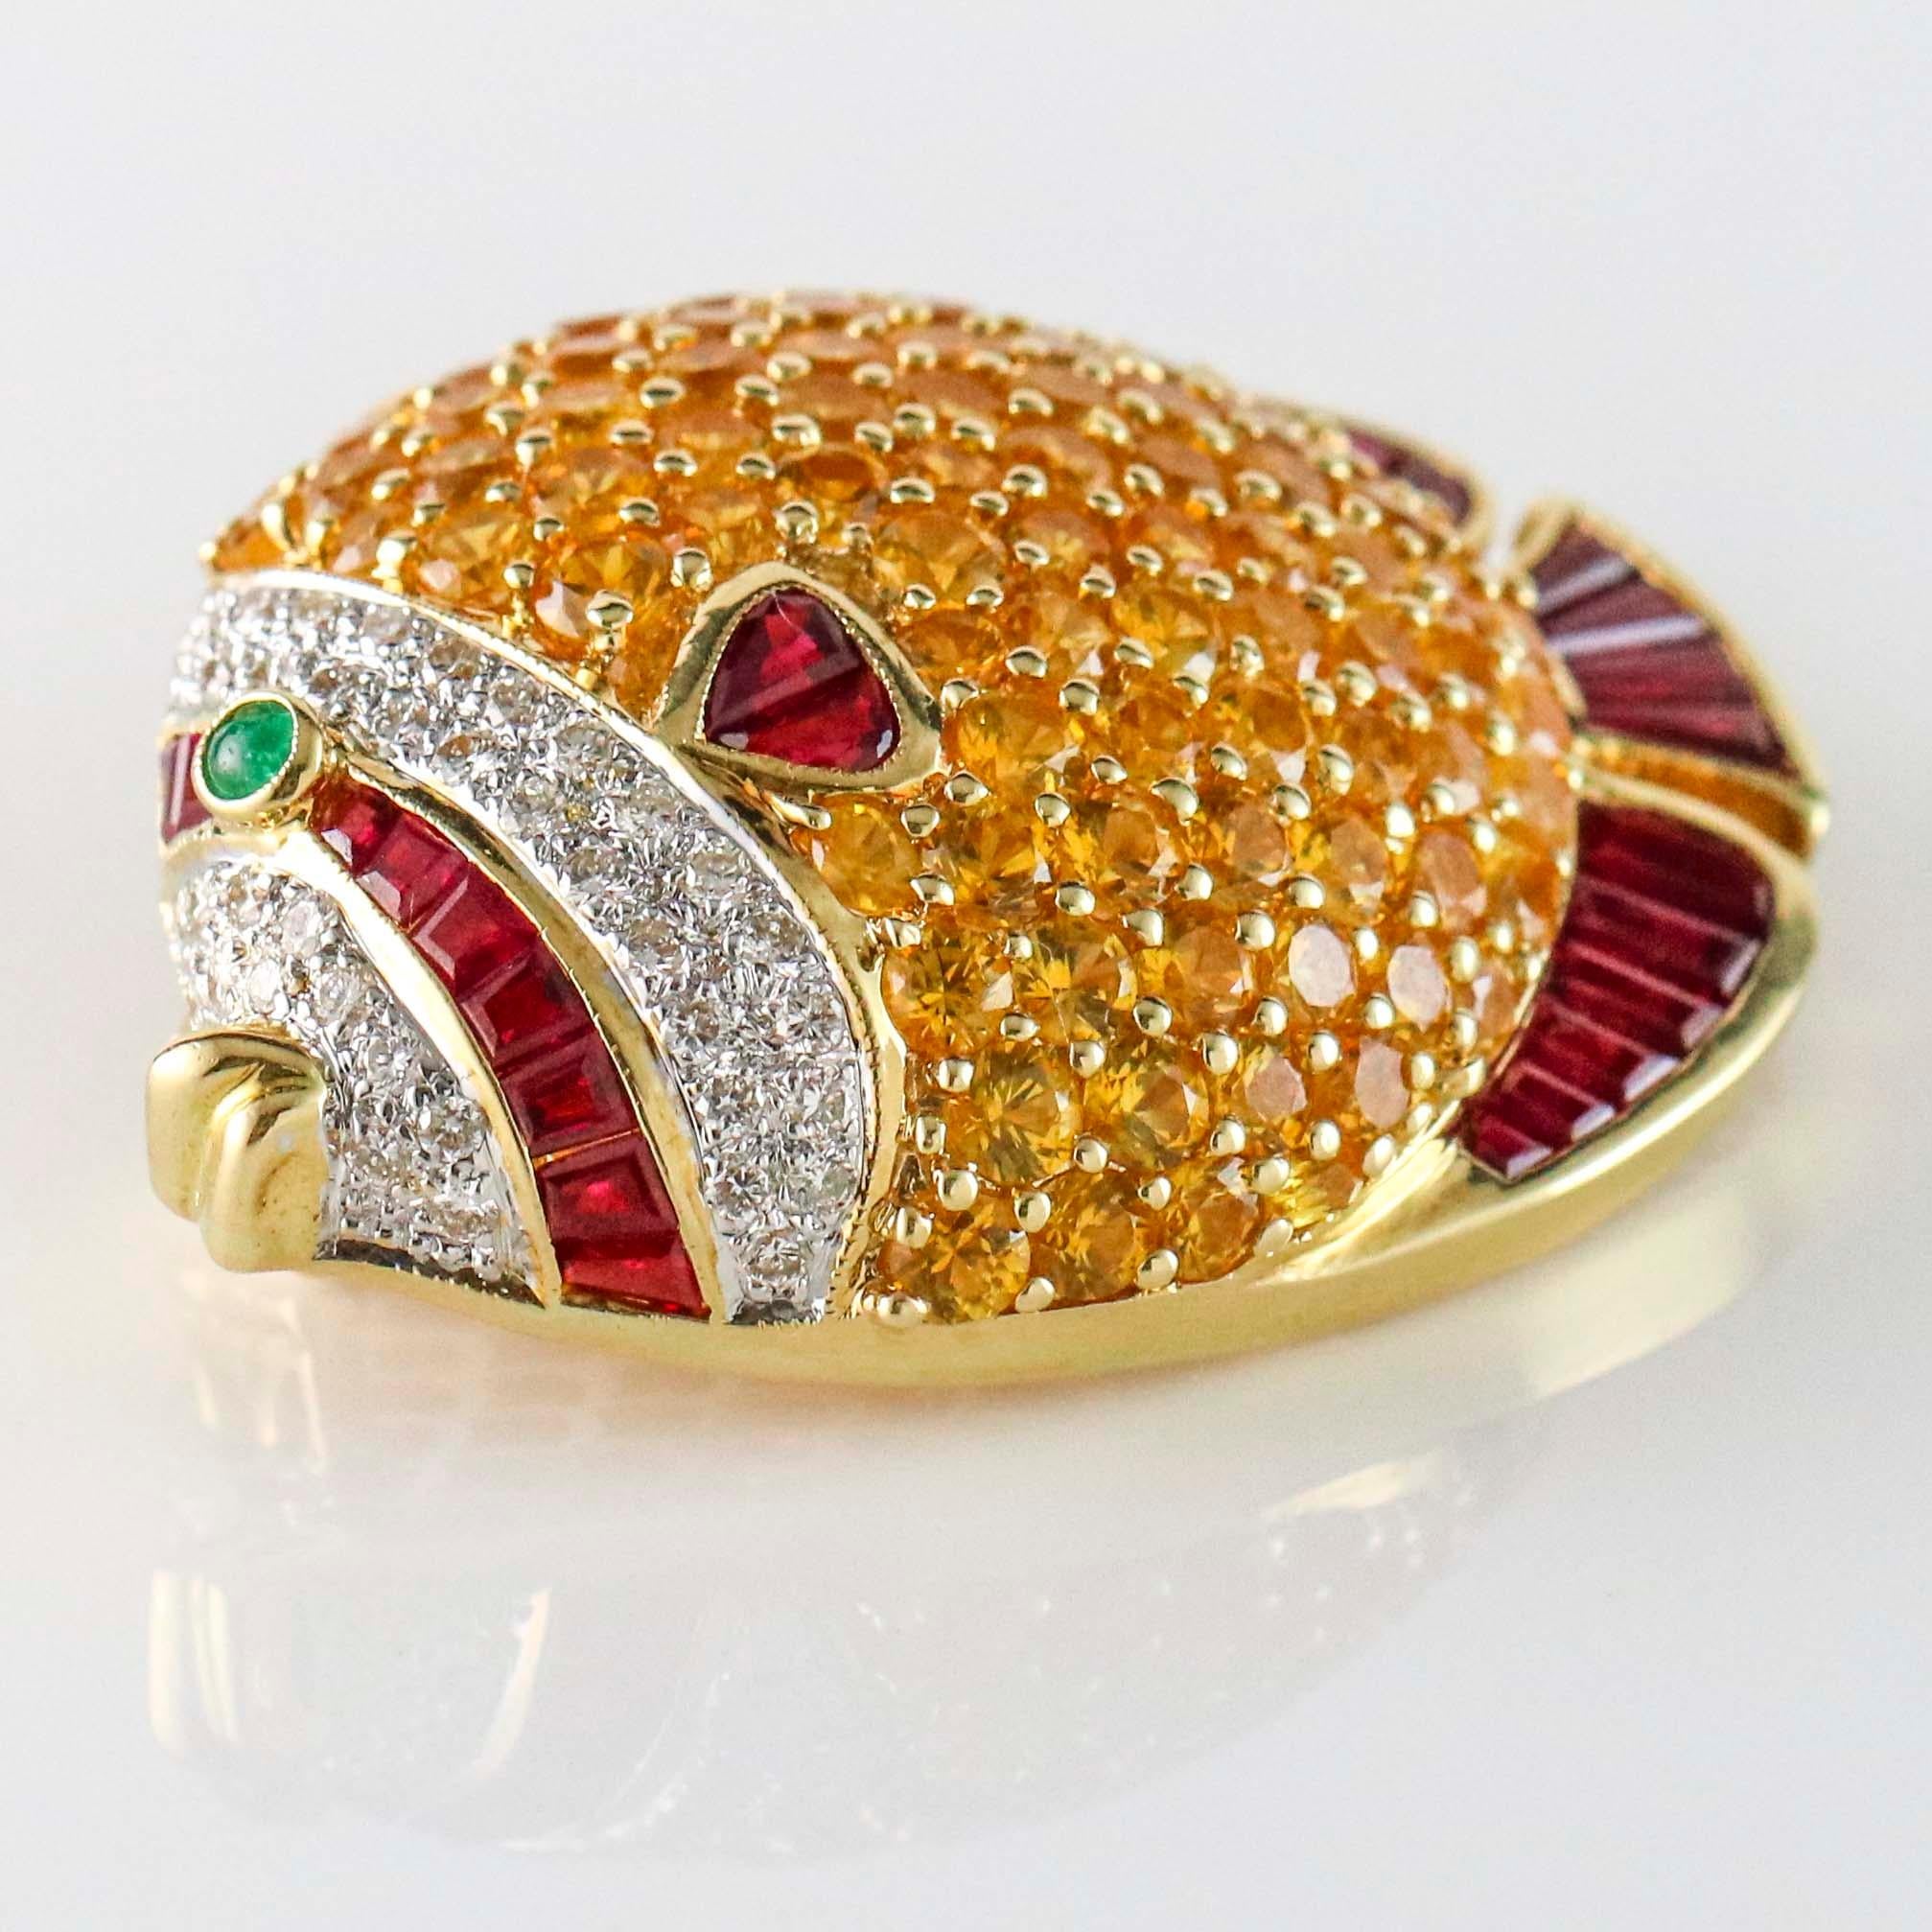 Fish pin crafted in 18k yellow gold with 7 carats of prong set natural yellow sapphires, 2 carats of channel set baguette cut rubies, .50 carats of round brilliant cut diamonds, and a bezel-set cabochon cut emerald accent on eye. 